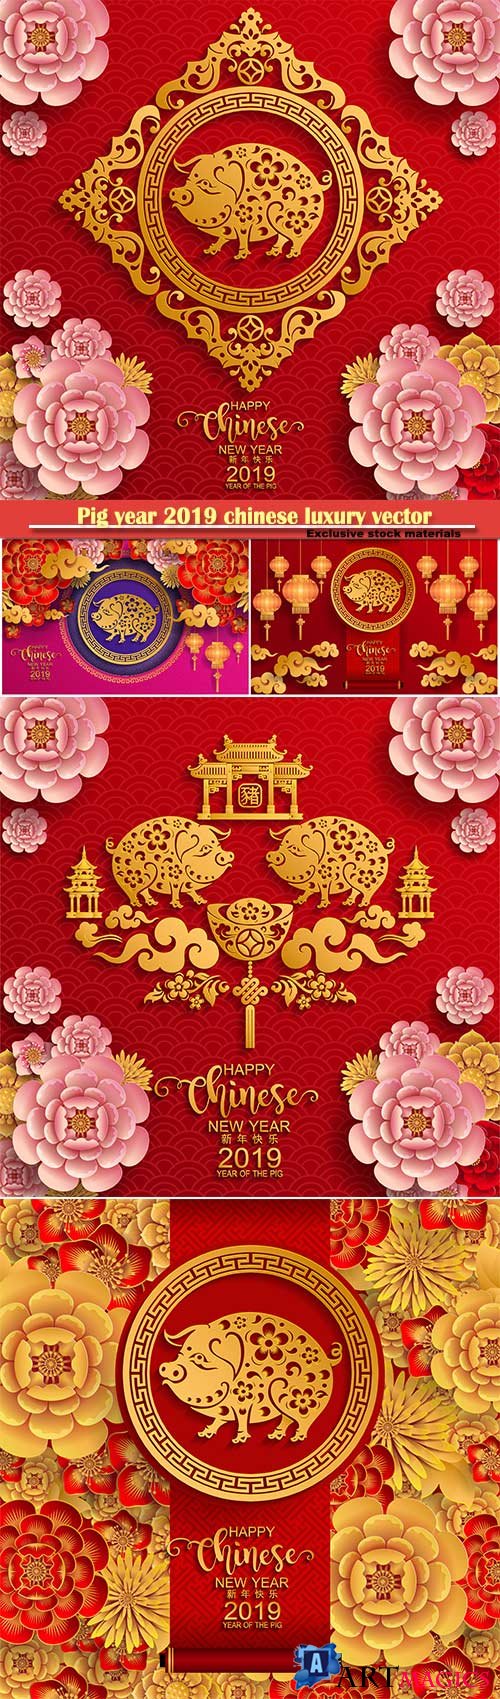 Pig year 2019 chinese luxury vector card # 5